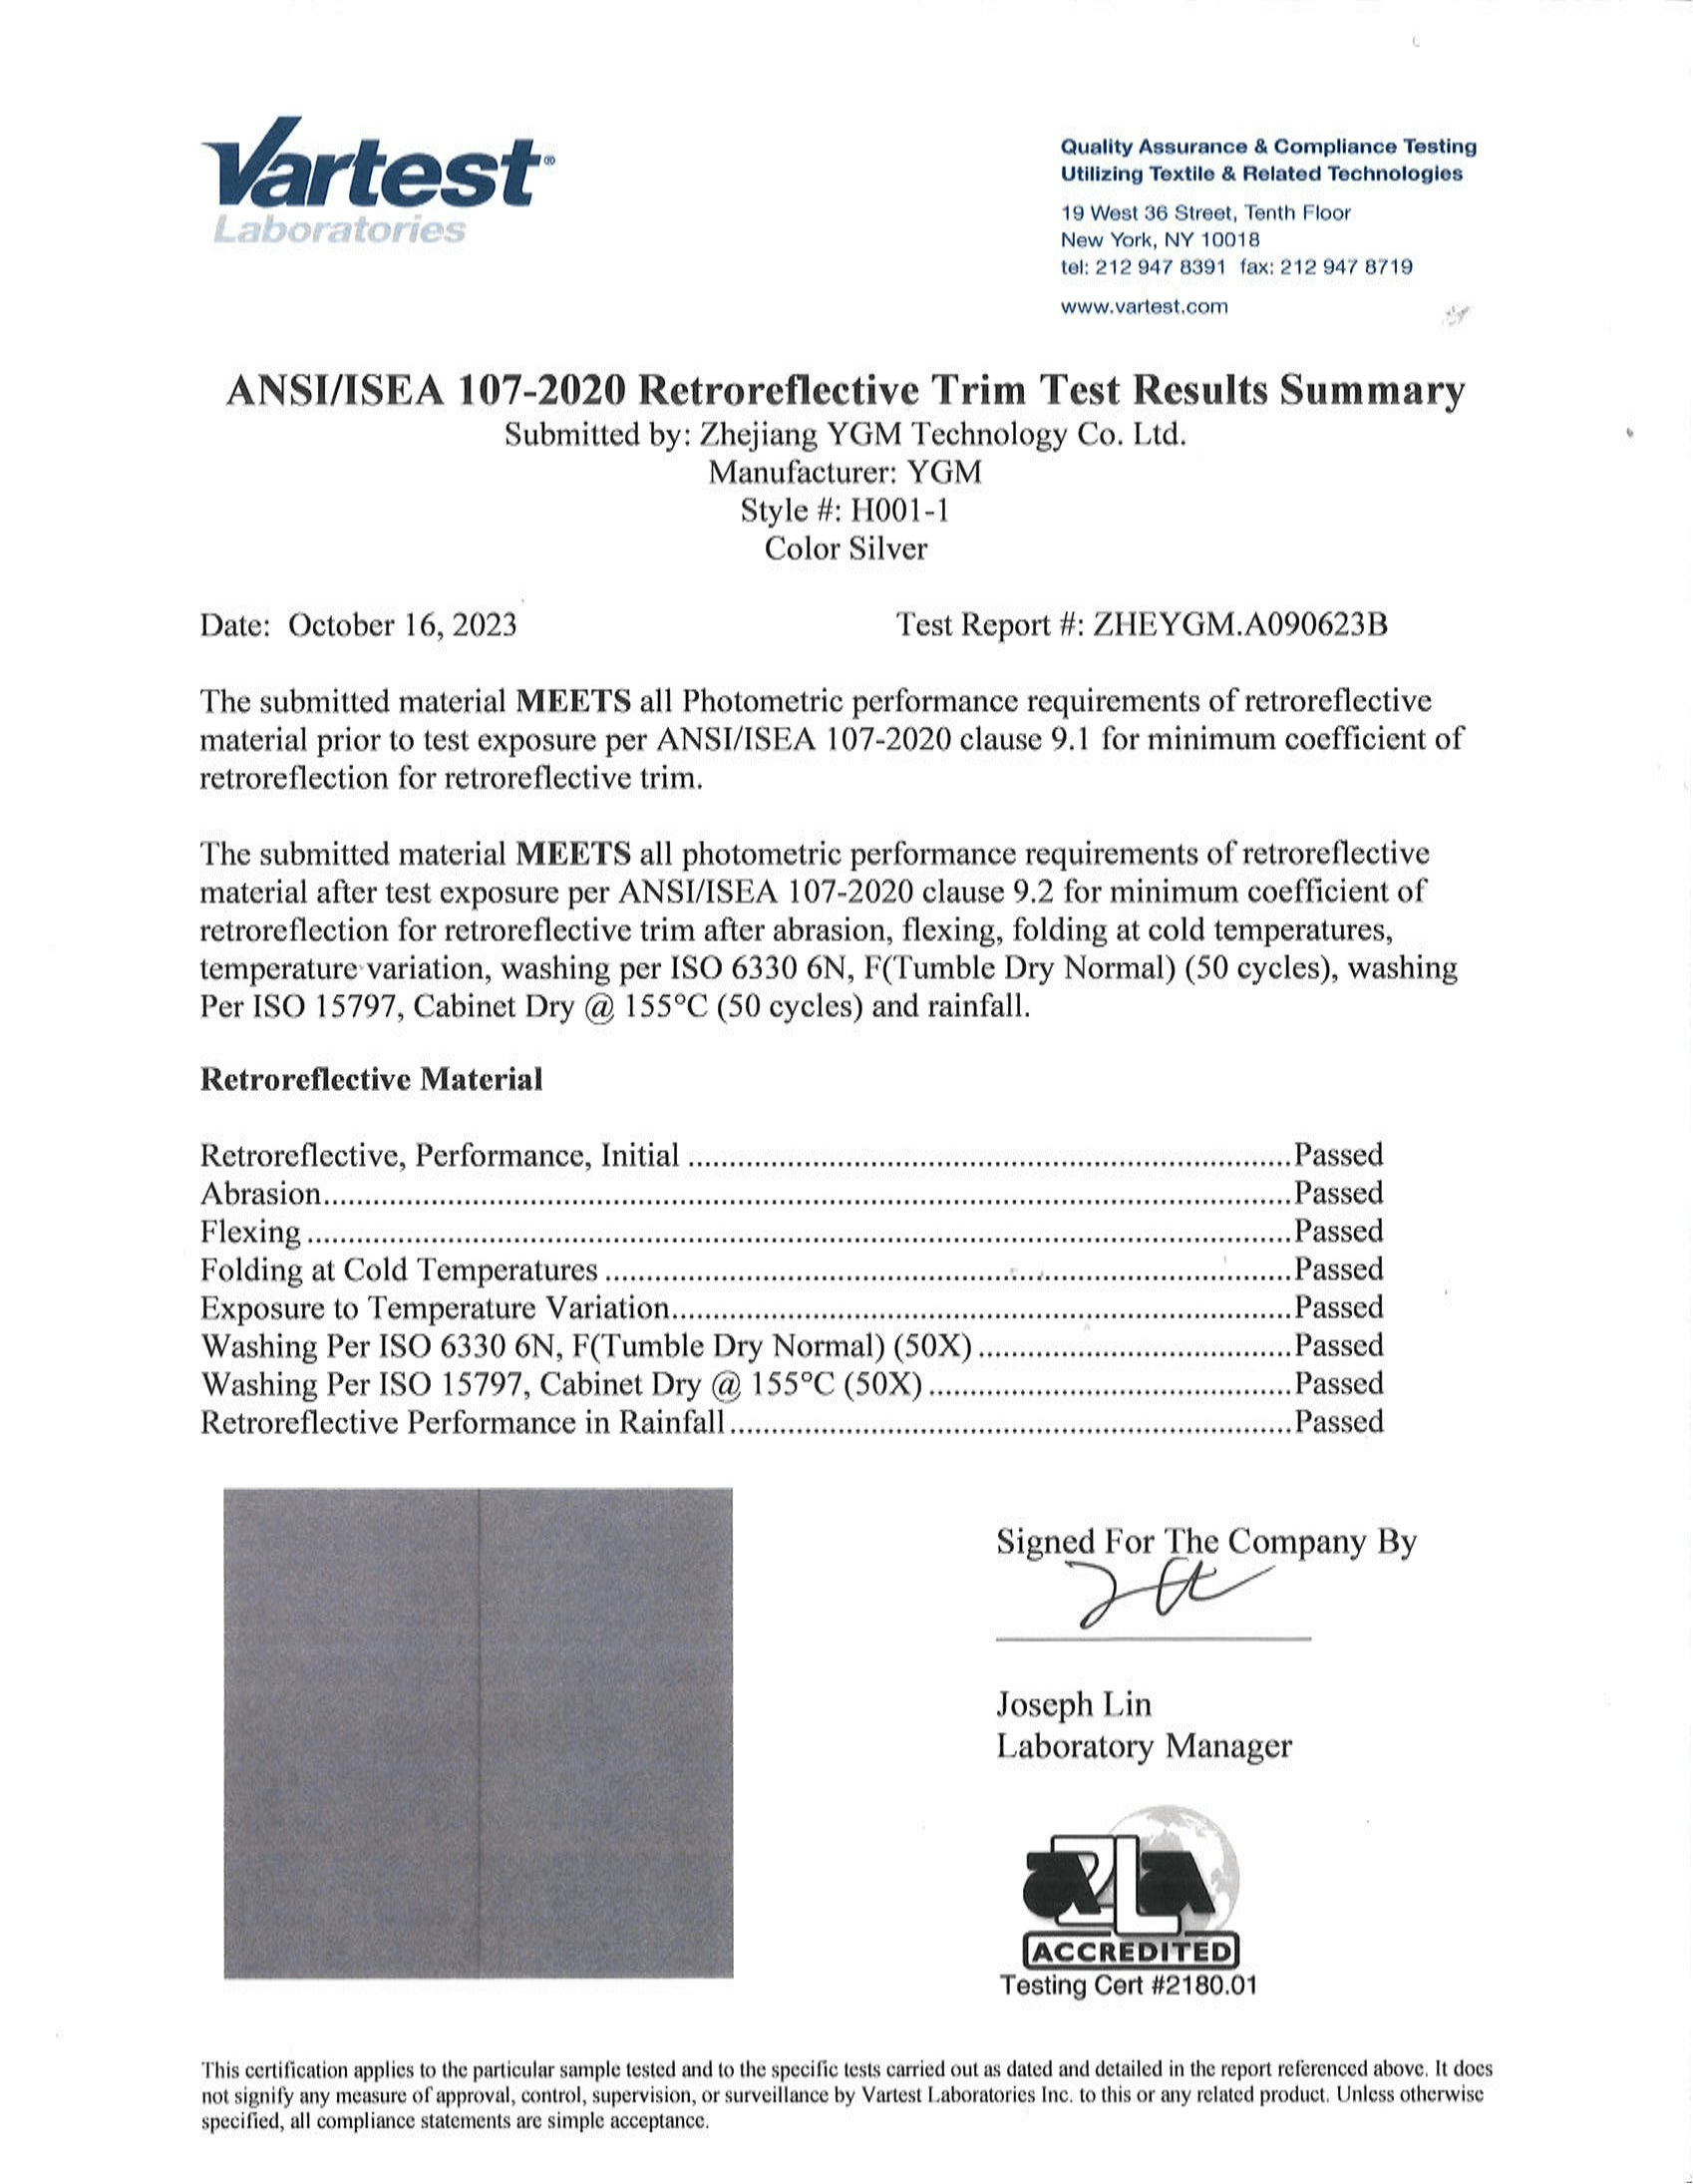 ANSI/ISEA 107 Certificate & Test Report for H001-1 Product2